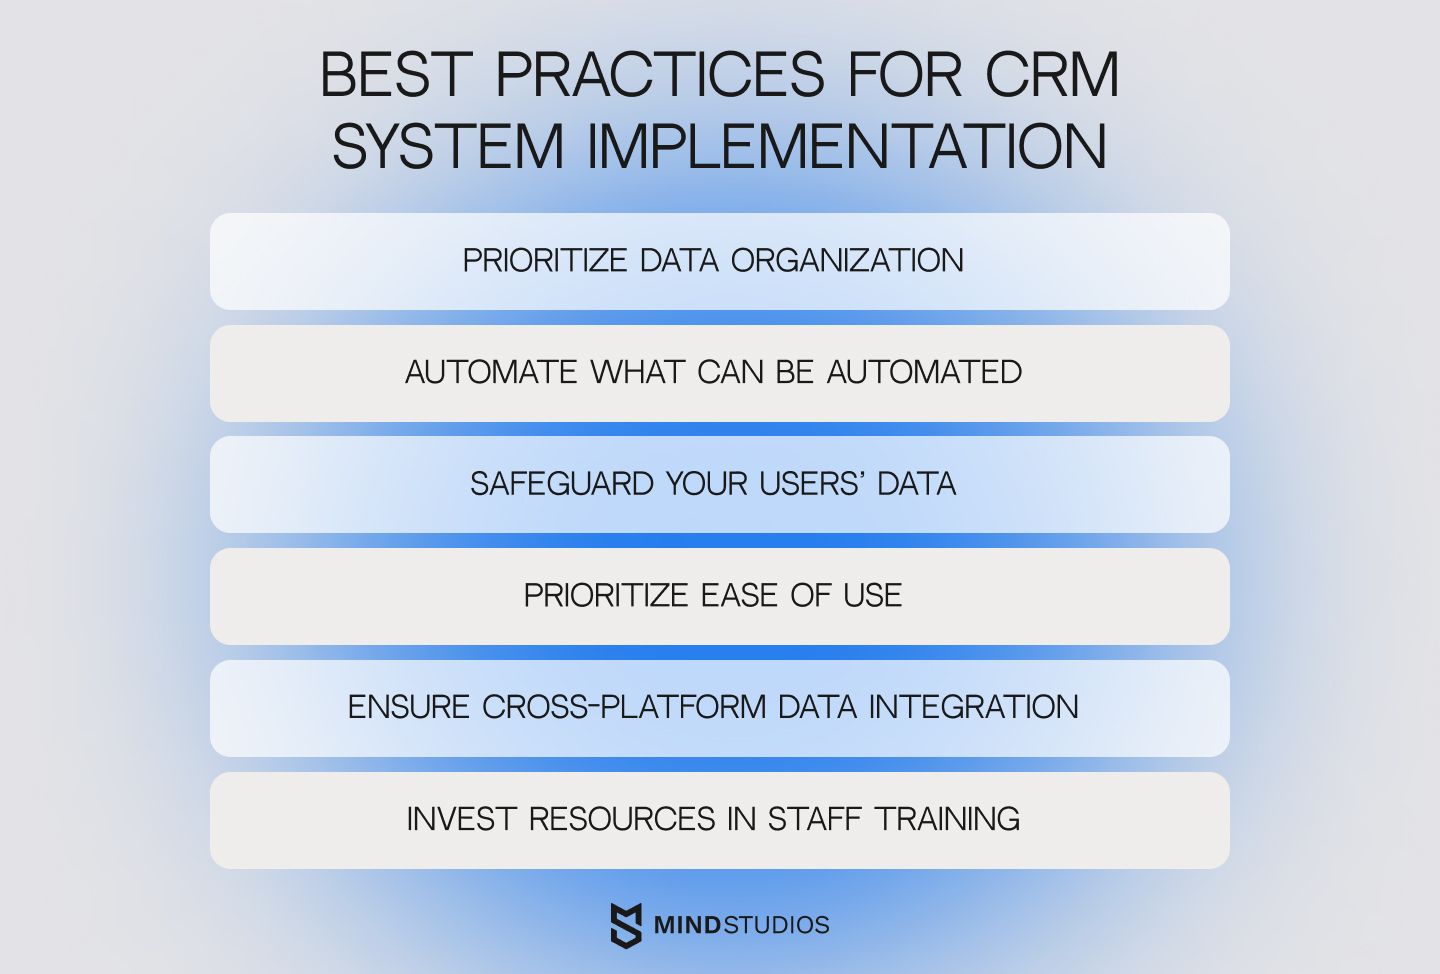 Best practices for CRM system implementation